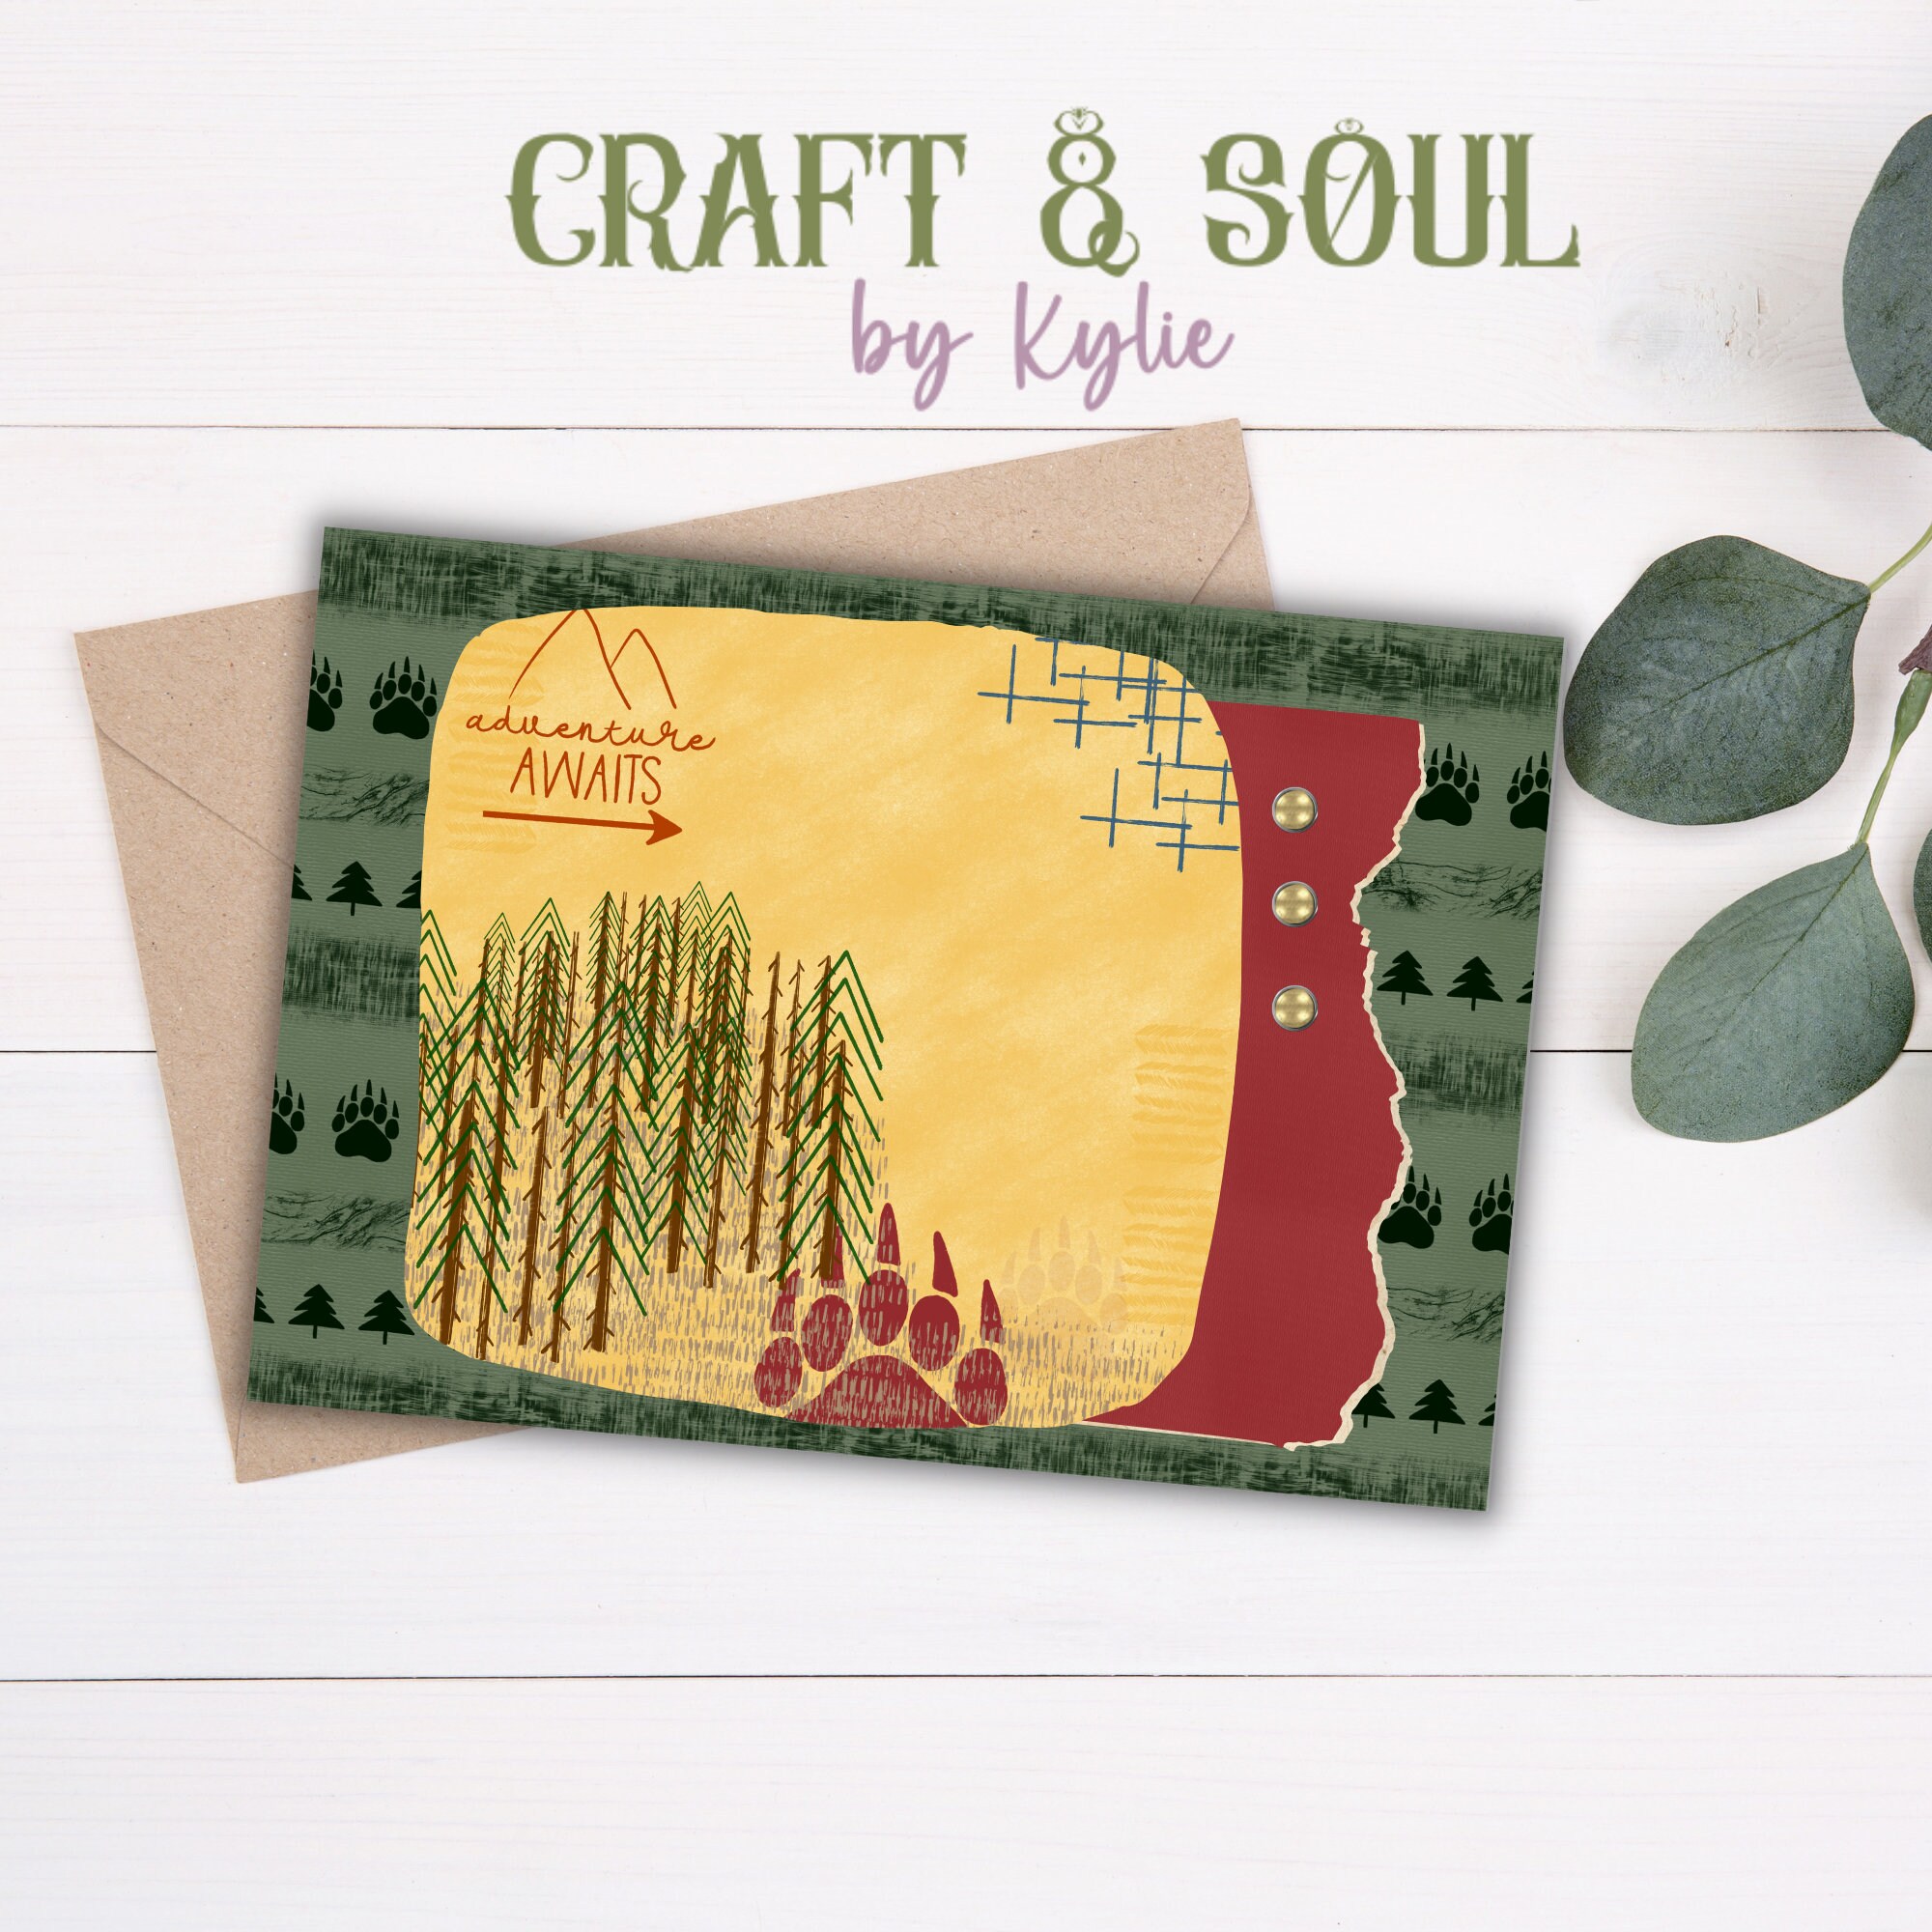 Craft and Soul by Kylie